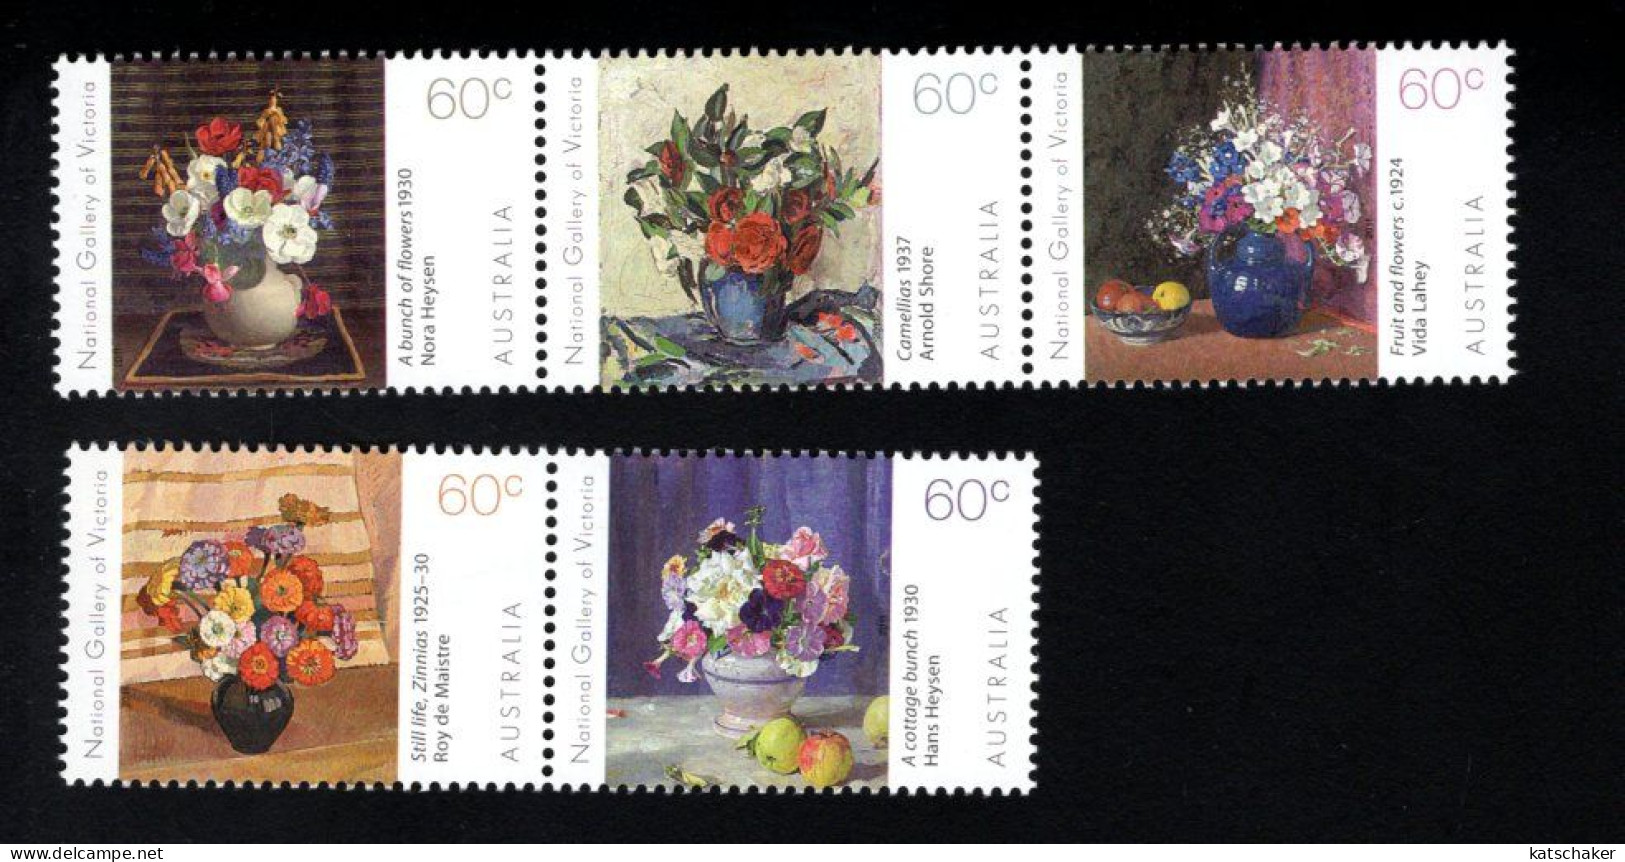 1927001838 2011 SCOTT 3429 3433 (**) POSTFRIS MINT NEVER HINGED EINWANDFREI - PAINTINGS OF FLOWERS IN NATIONAL GALLERY - Mint Stamps